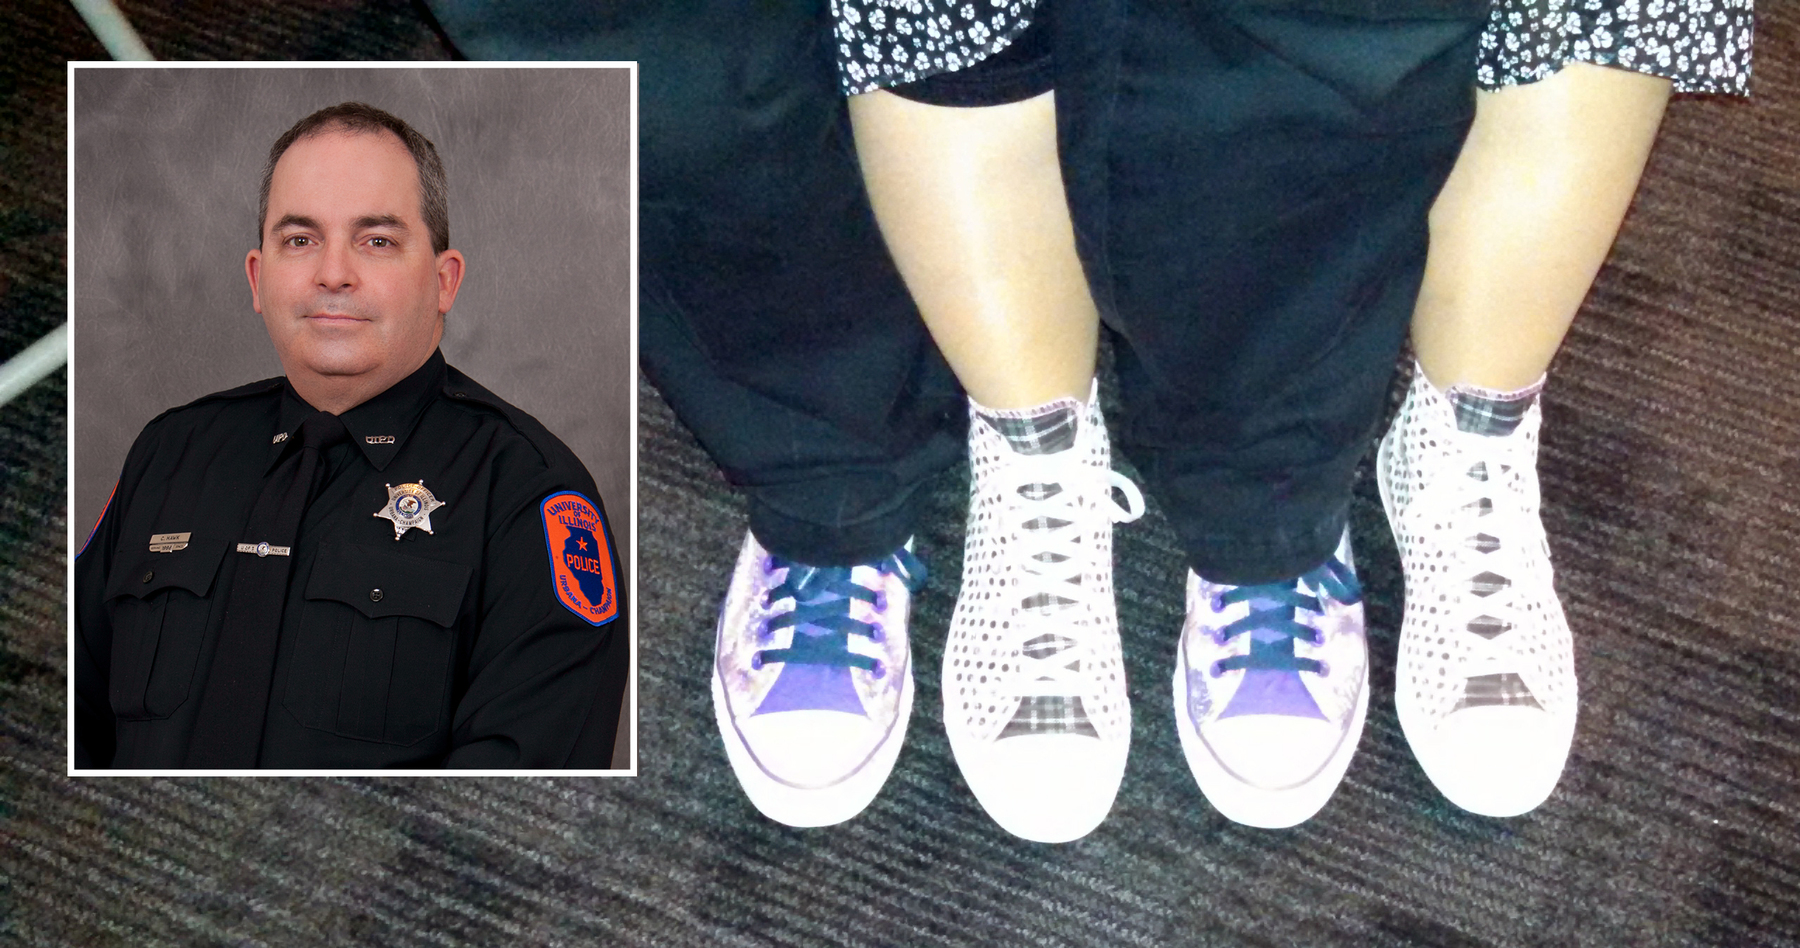 Officer Chris Hawk and his wife show off their footwear at the University of Illinois Police Department annual awards ceremony in 2015.